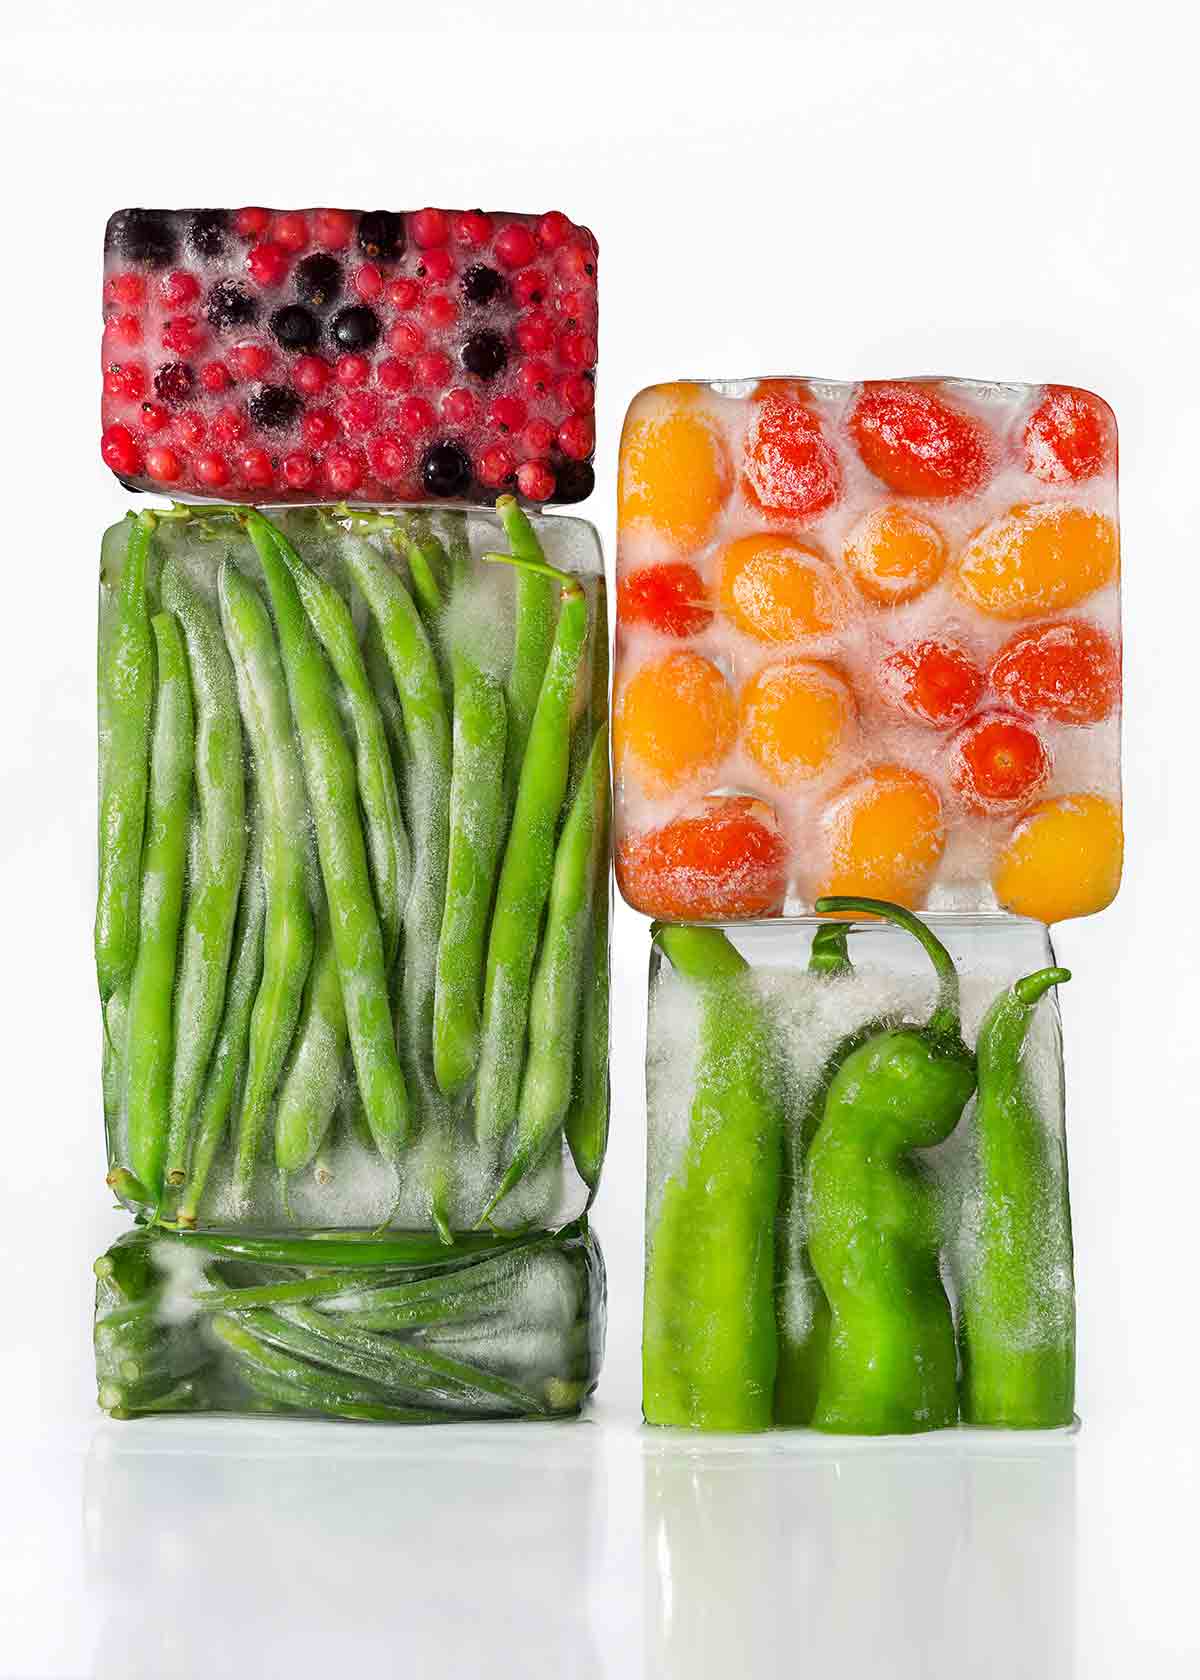 Four blocks of ice with berries, cherry tomatoes, green beans, and fava beans frozen inside